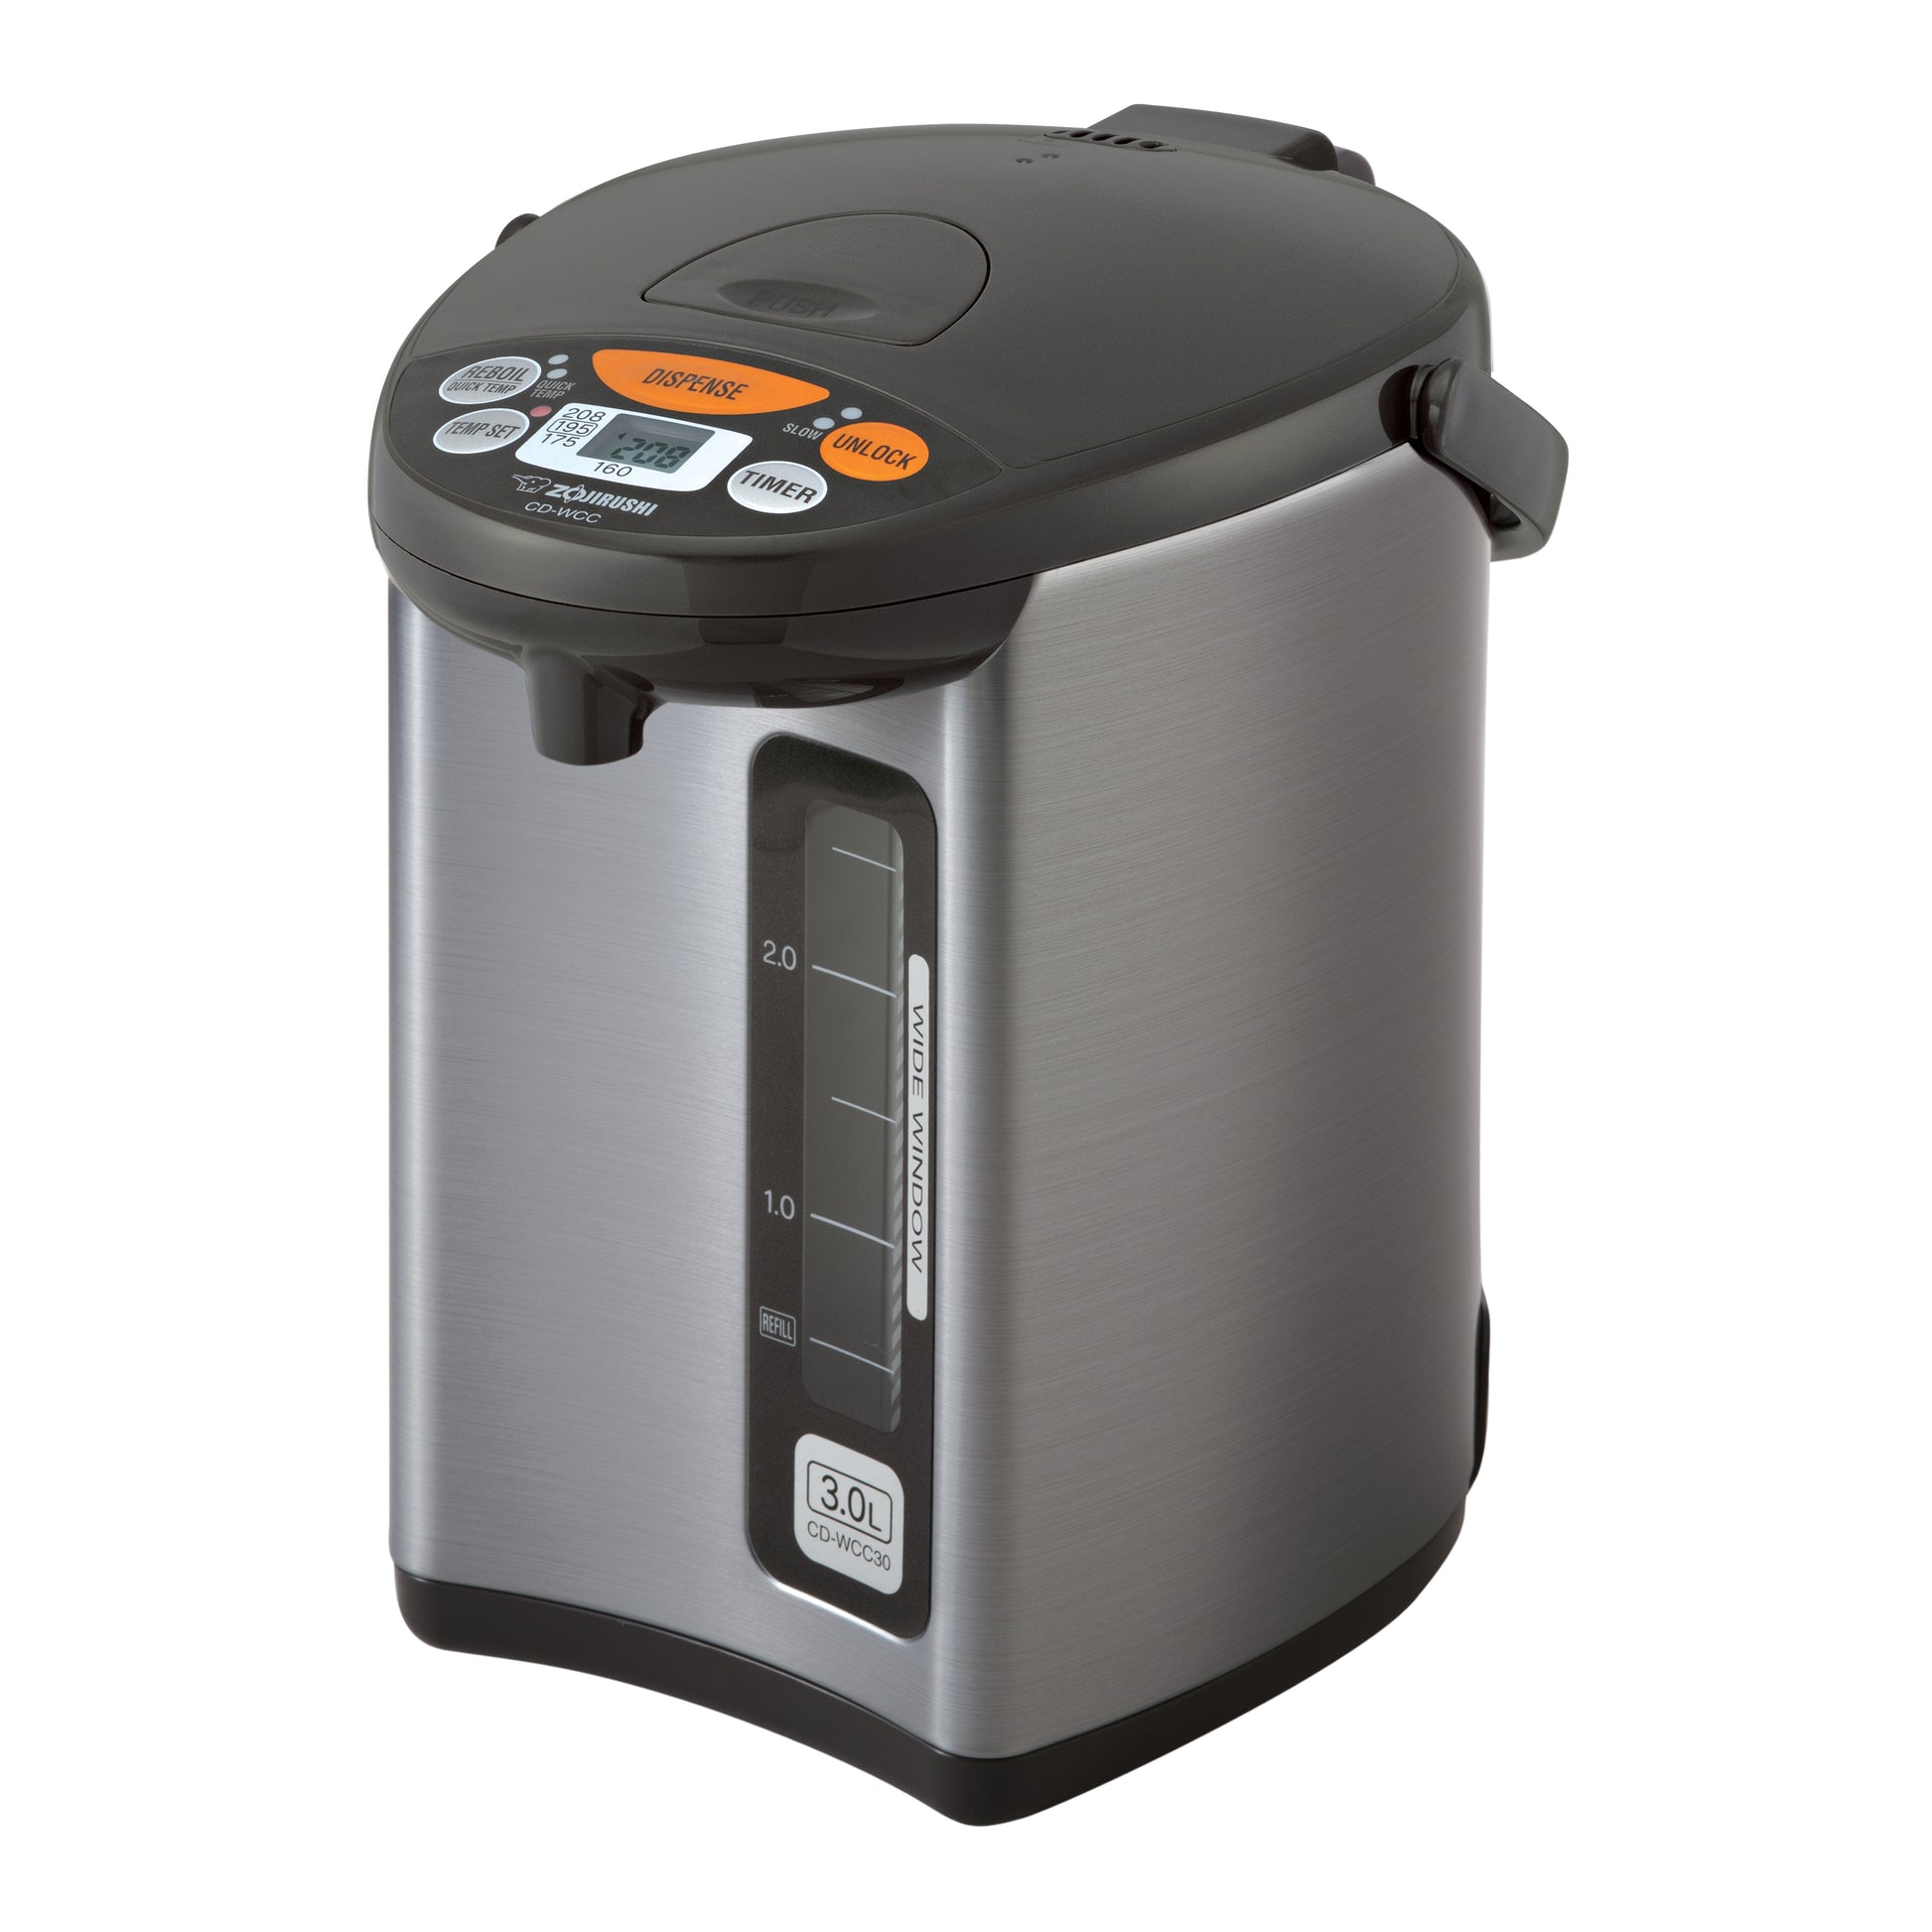 Zojirushi CD-CC40 VE Hybrid Water Boiler and Warmer with Descaling